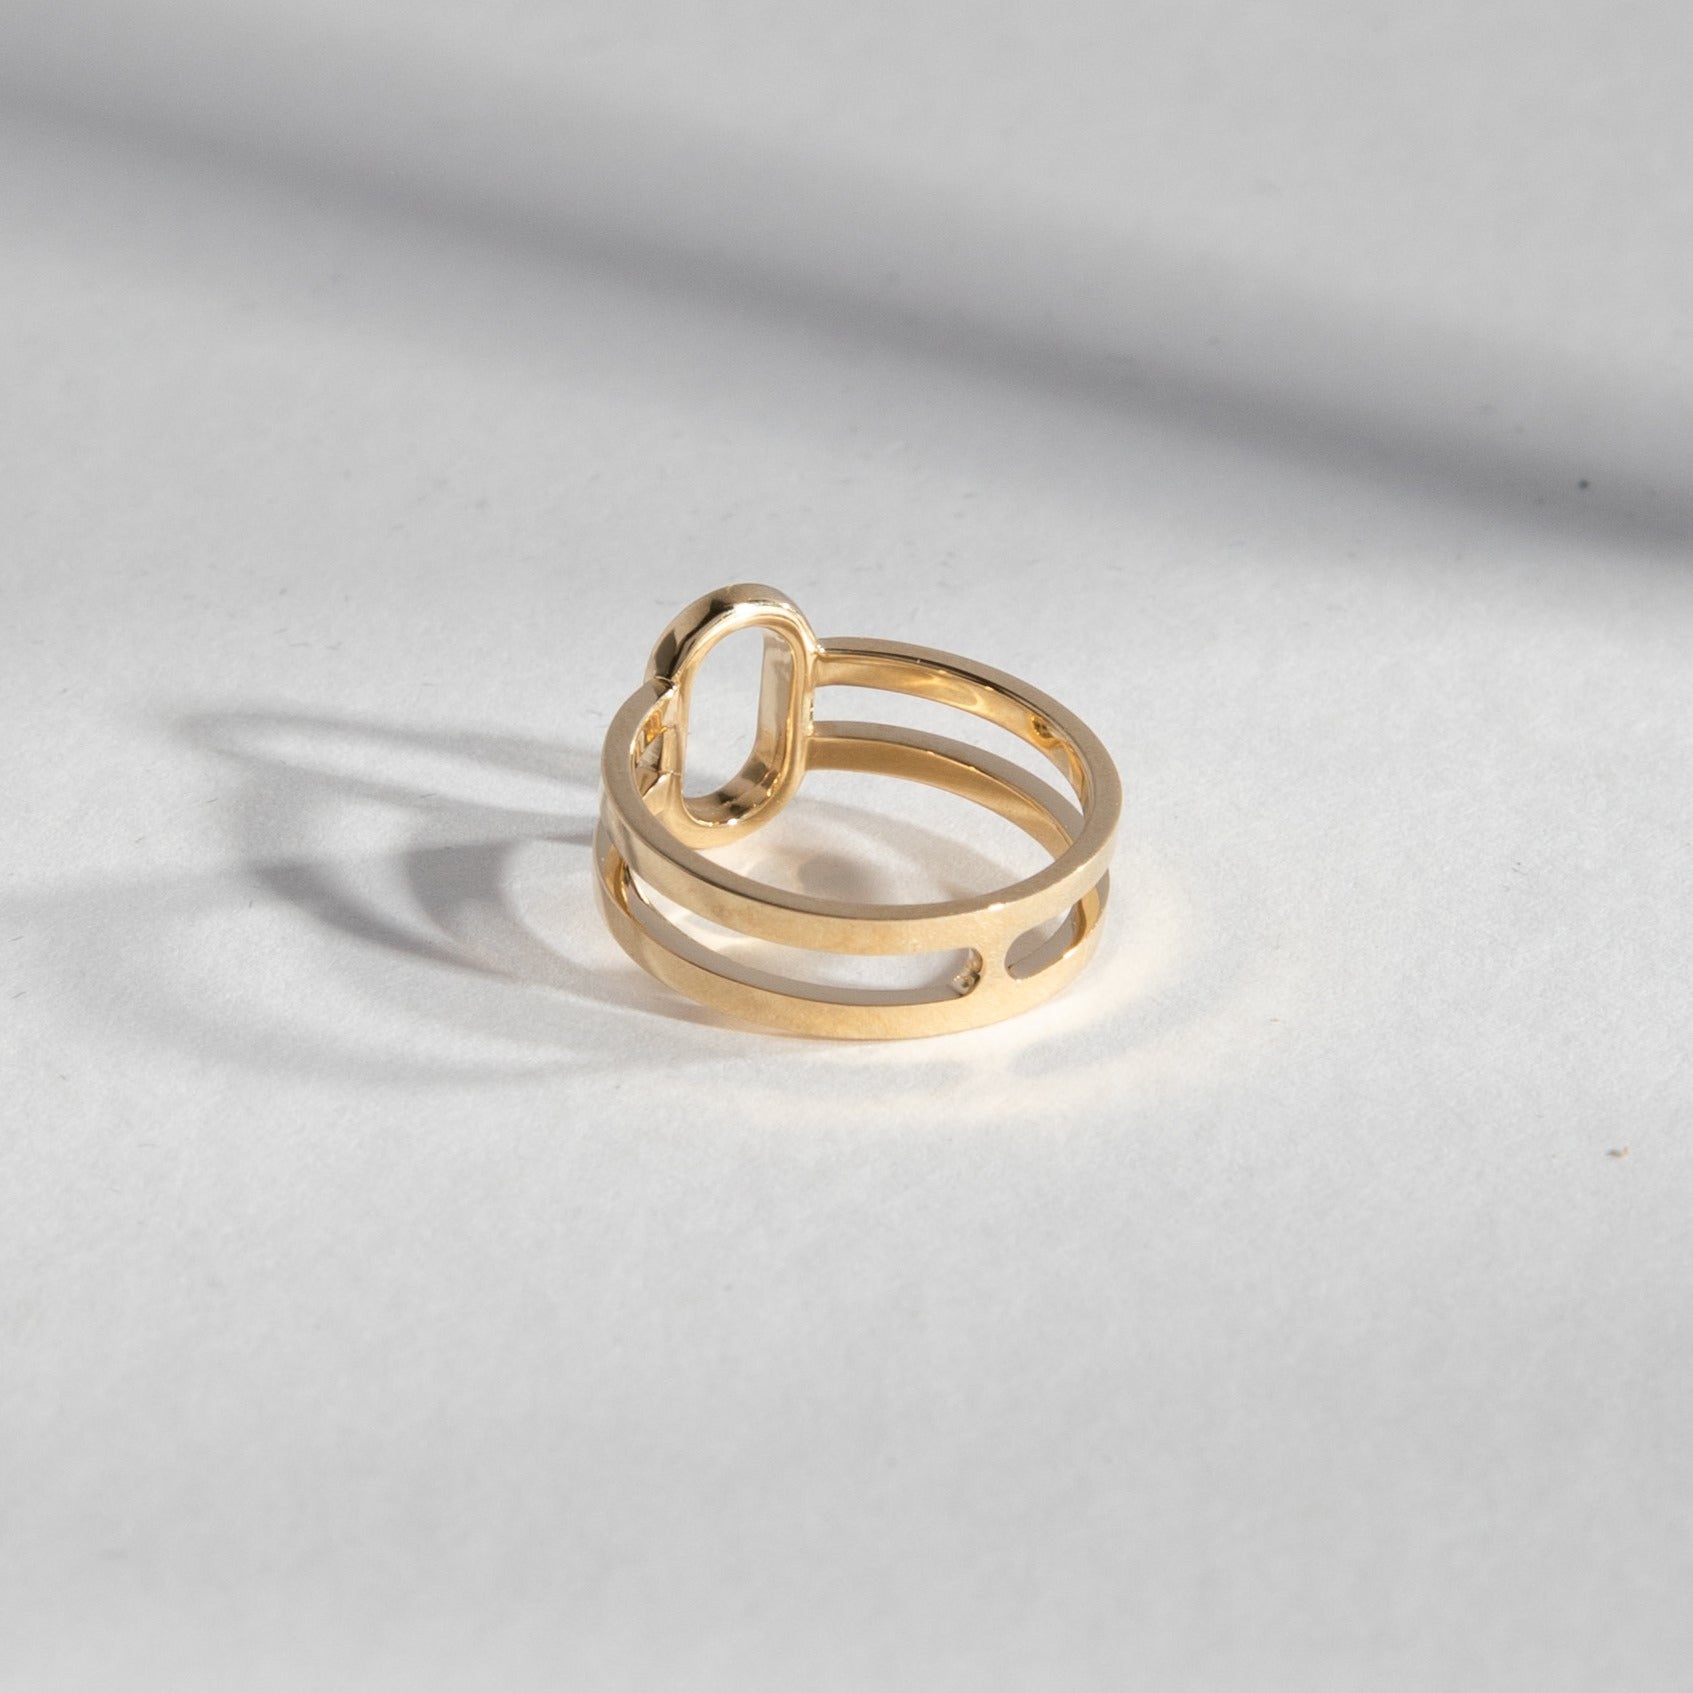 Maiti Minimal Ring in 14k Gold By SHW Fine Jewelry NYC